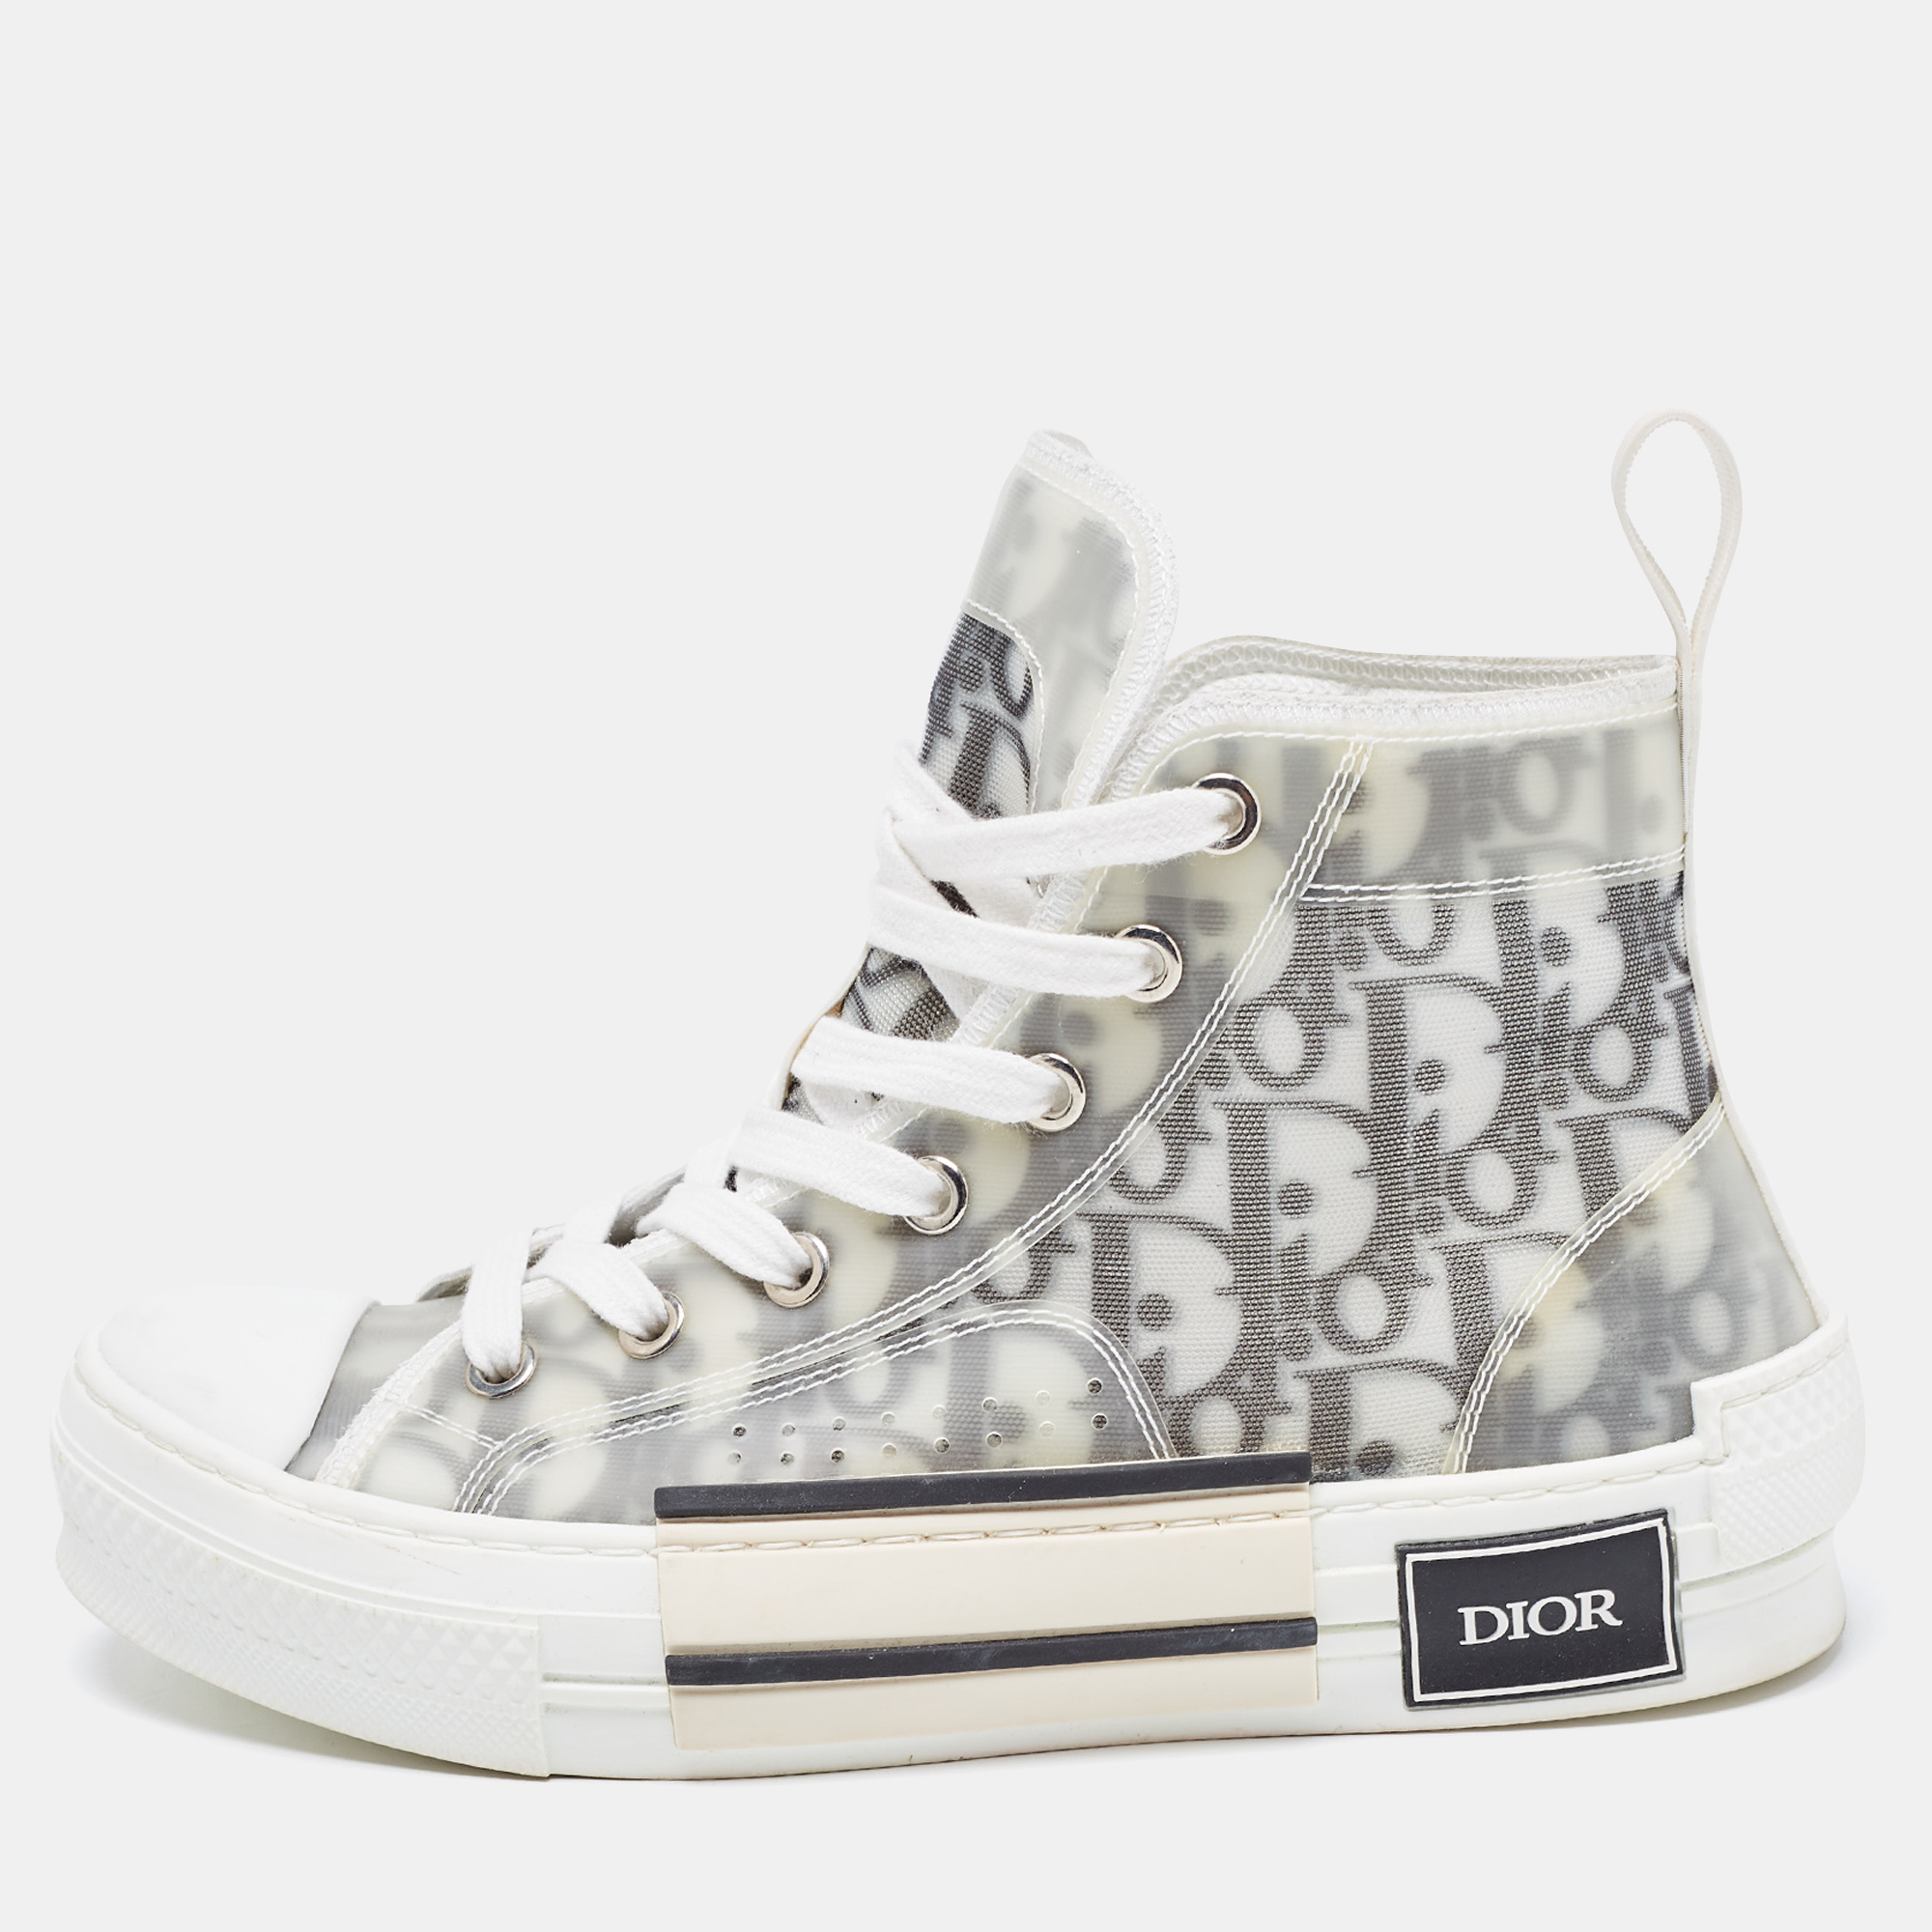 DIOR Vibe Sneaker Gray Dior Oblique Technical Fabric And Transparent Rubber - Size 35.5 - Women